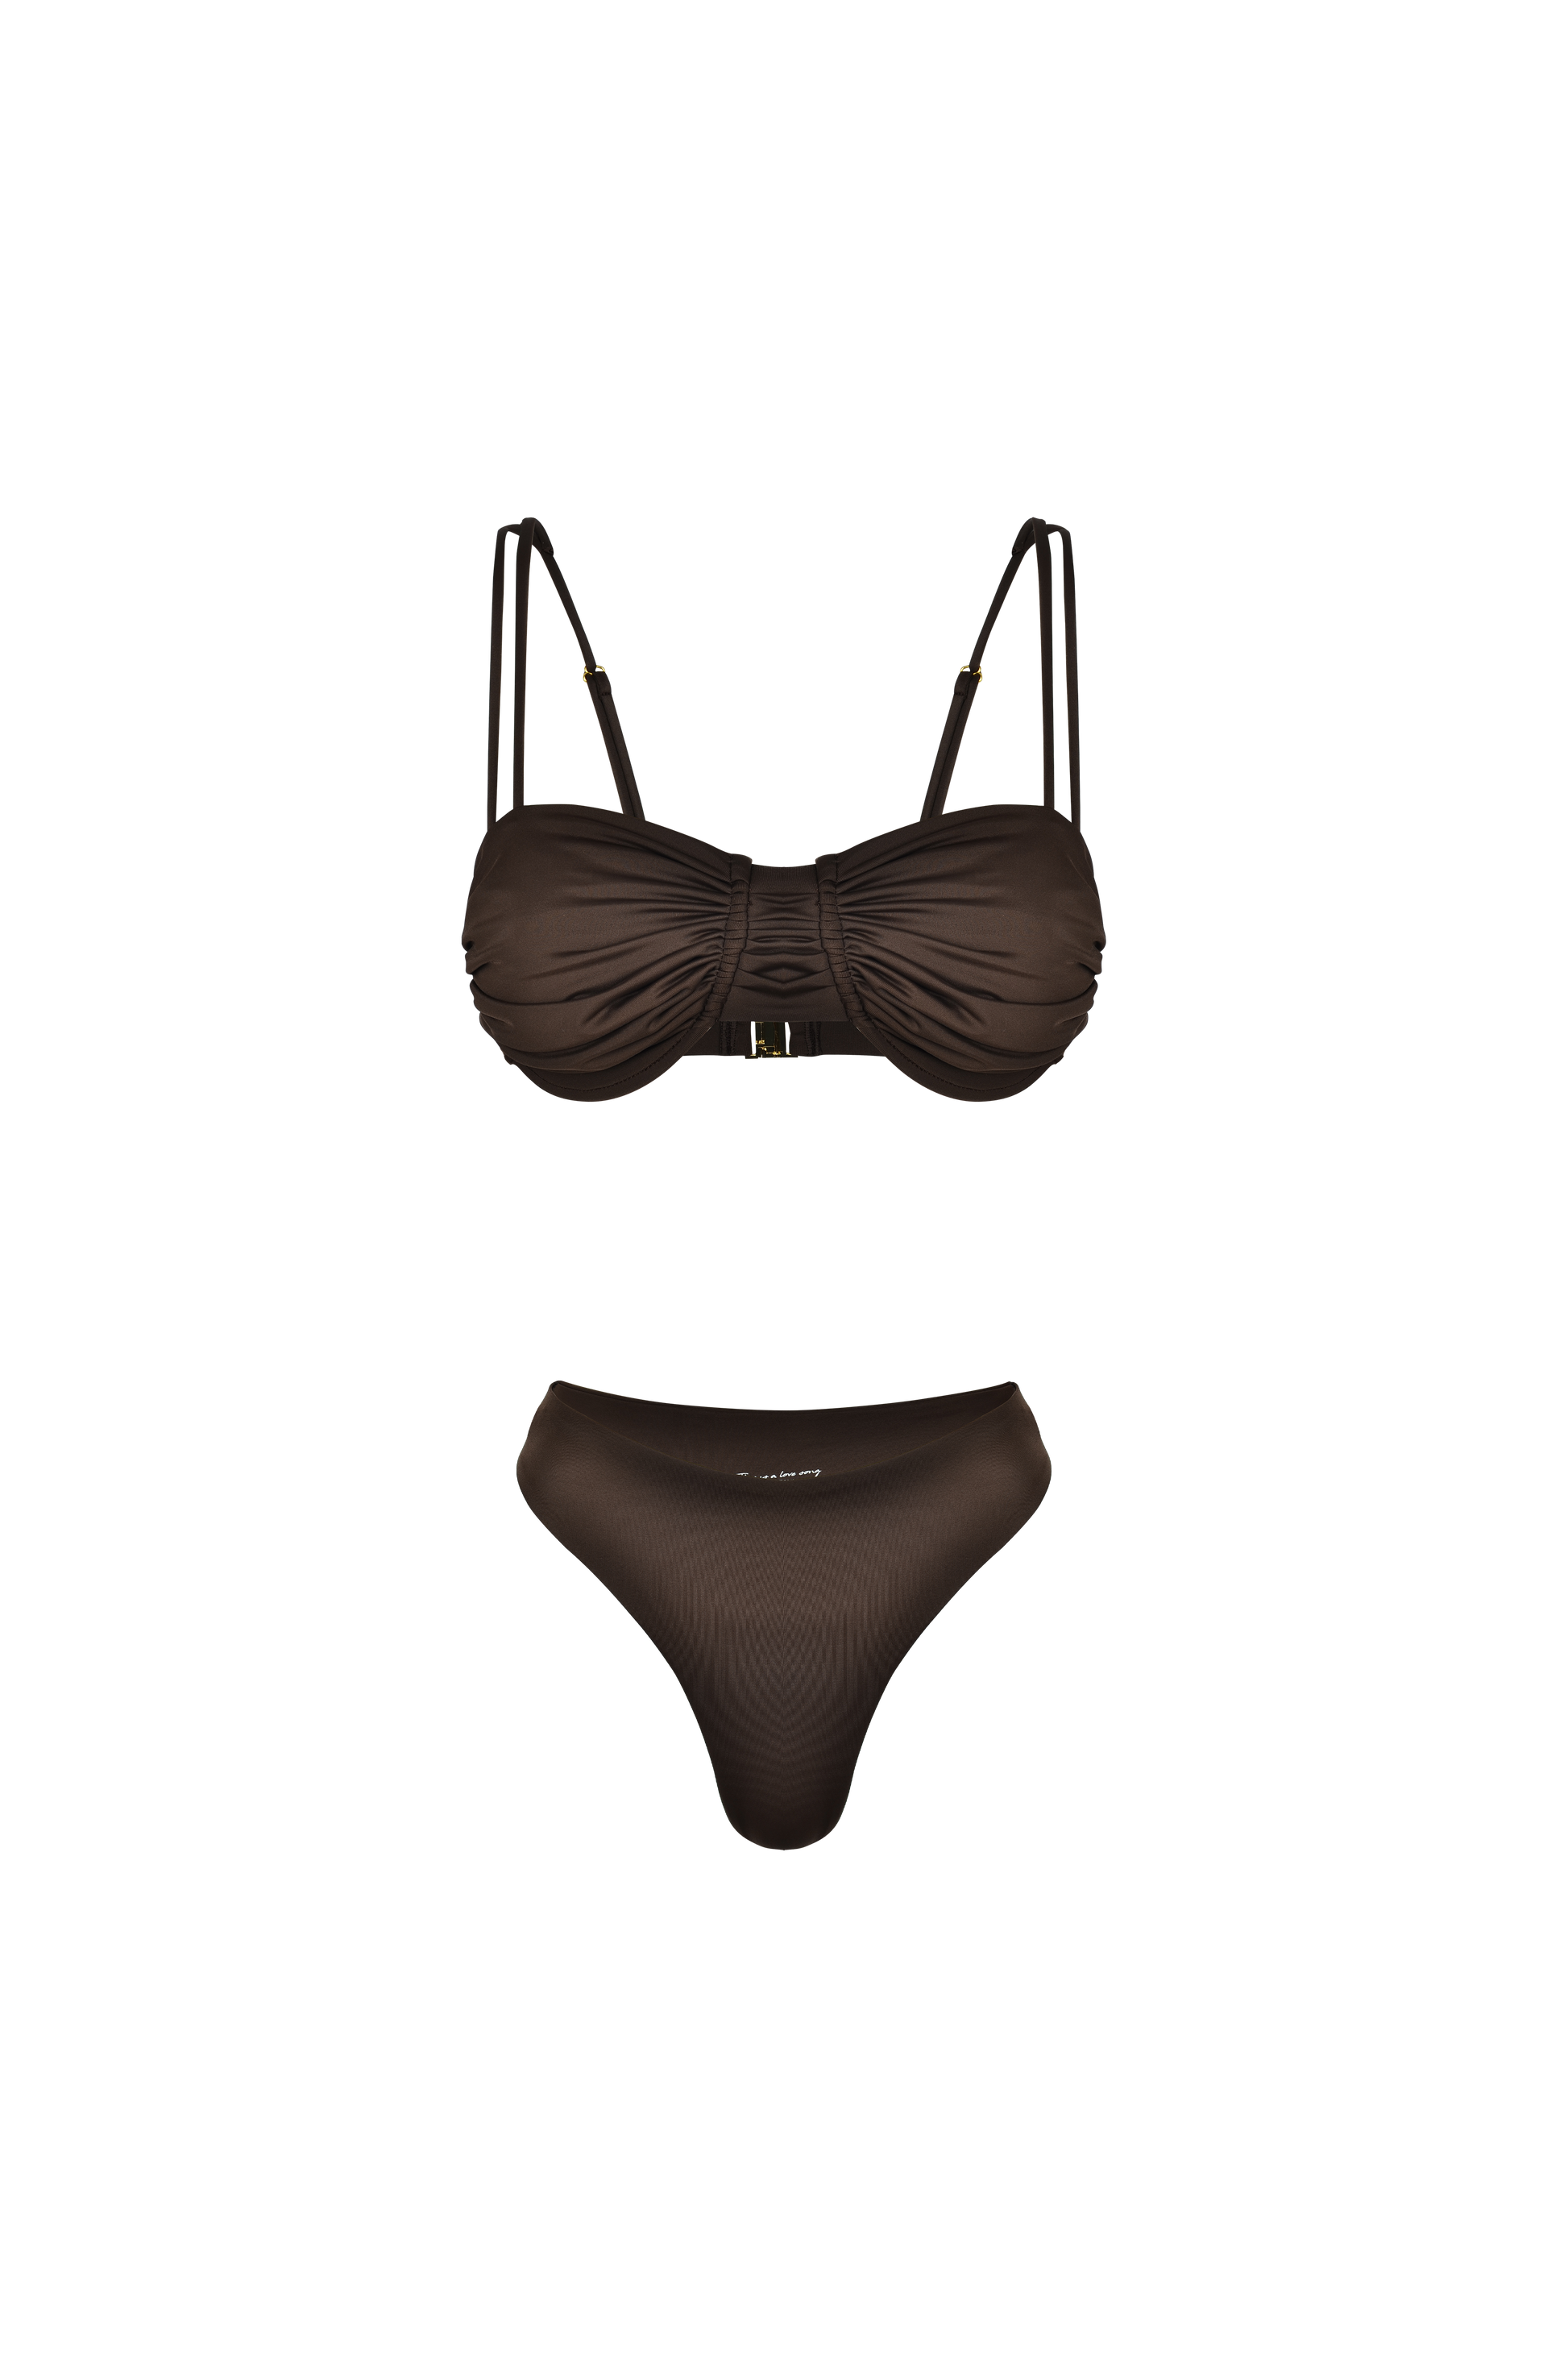 Zephyr Top Choco - Swimwear THIS IS A LOVE SONG